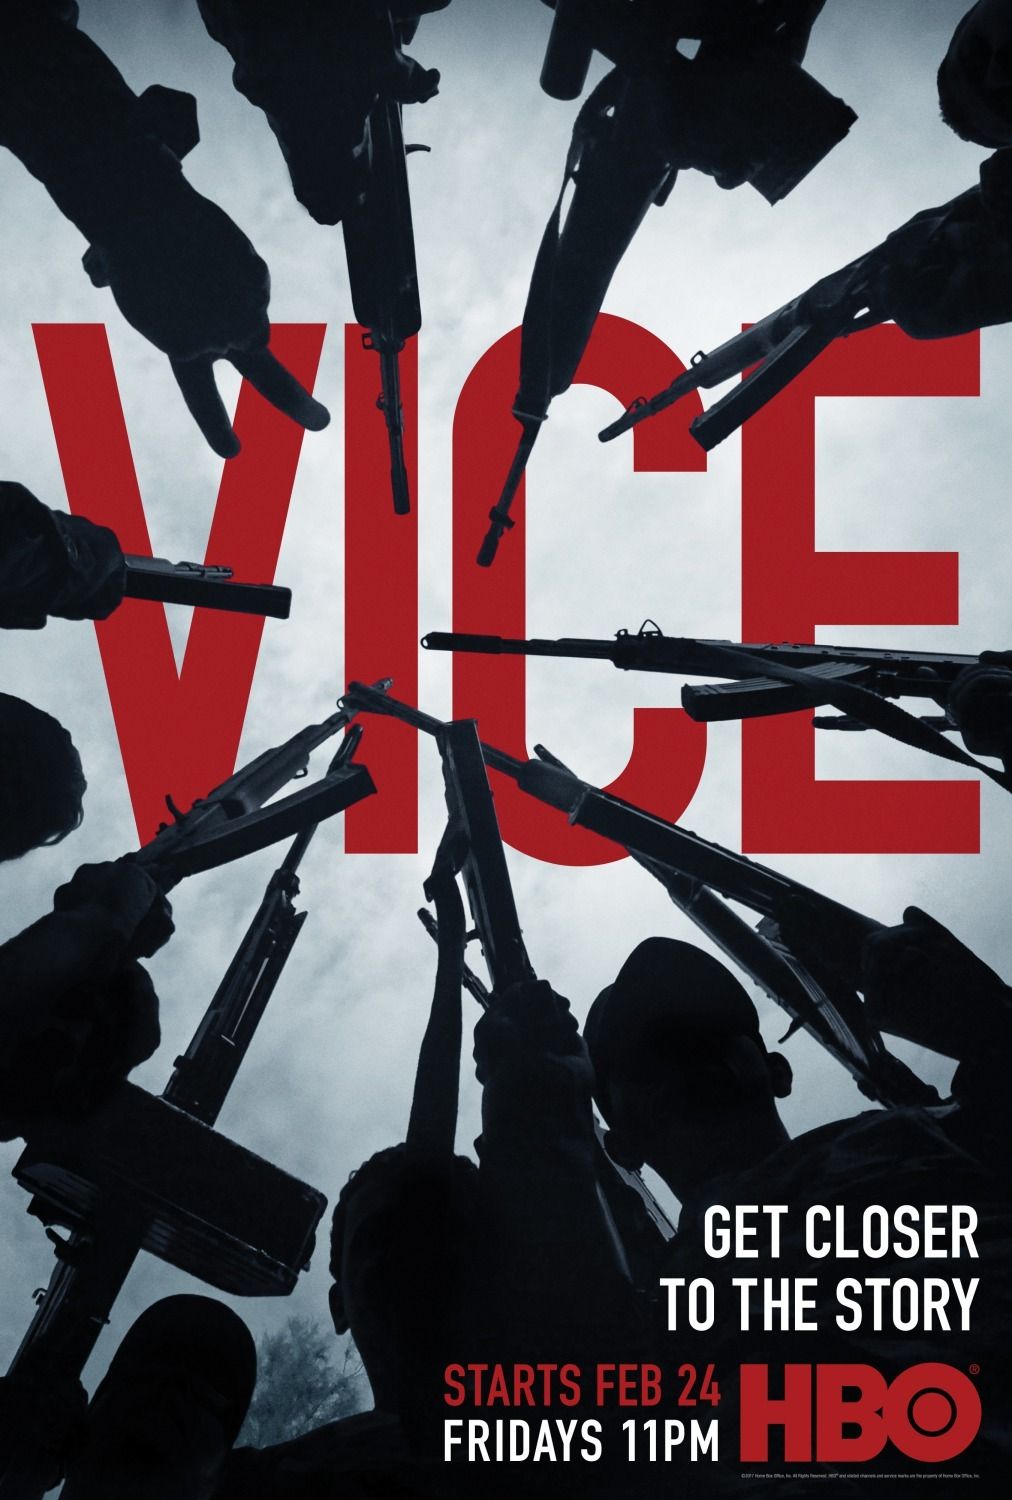 VICE TV Show Poster